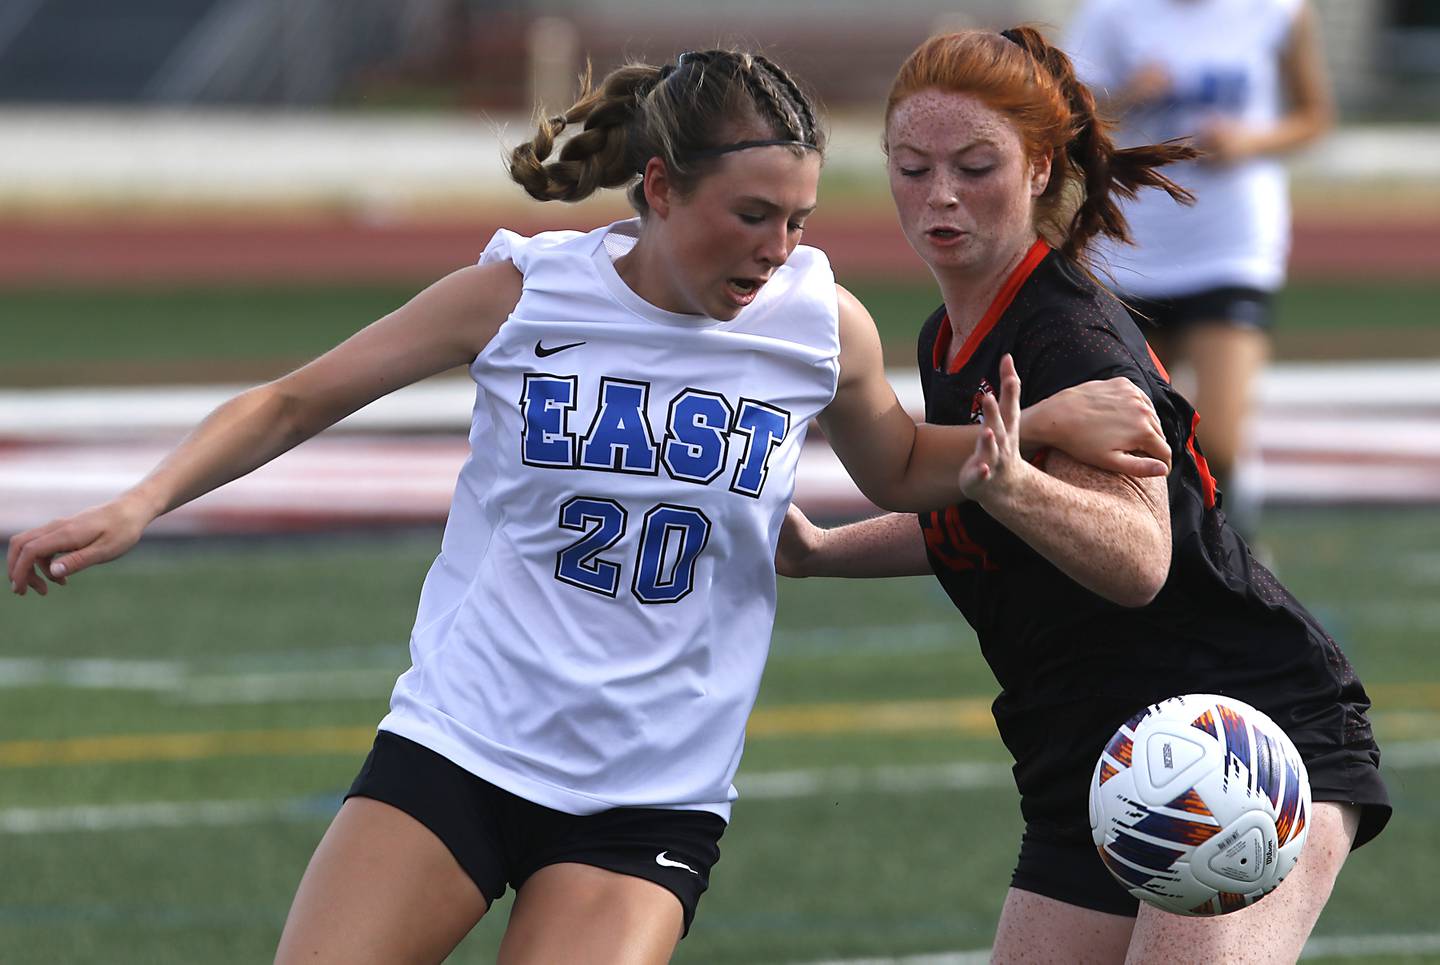 Lincoln-Way East's Breanna Herlihy tries to chase down the ball in front of Libertyville’s Ellie Rebman during the IHSA Class 3A state third-place match at North Central College in Naperville on Saturday, June 3, 2023.